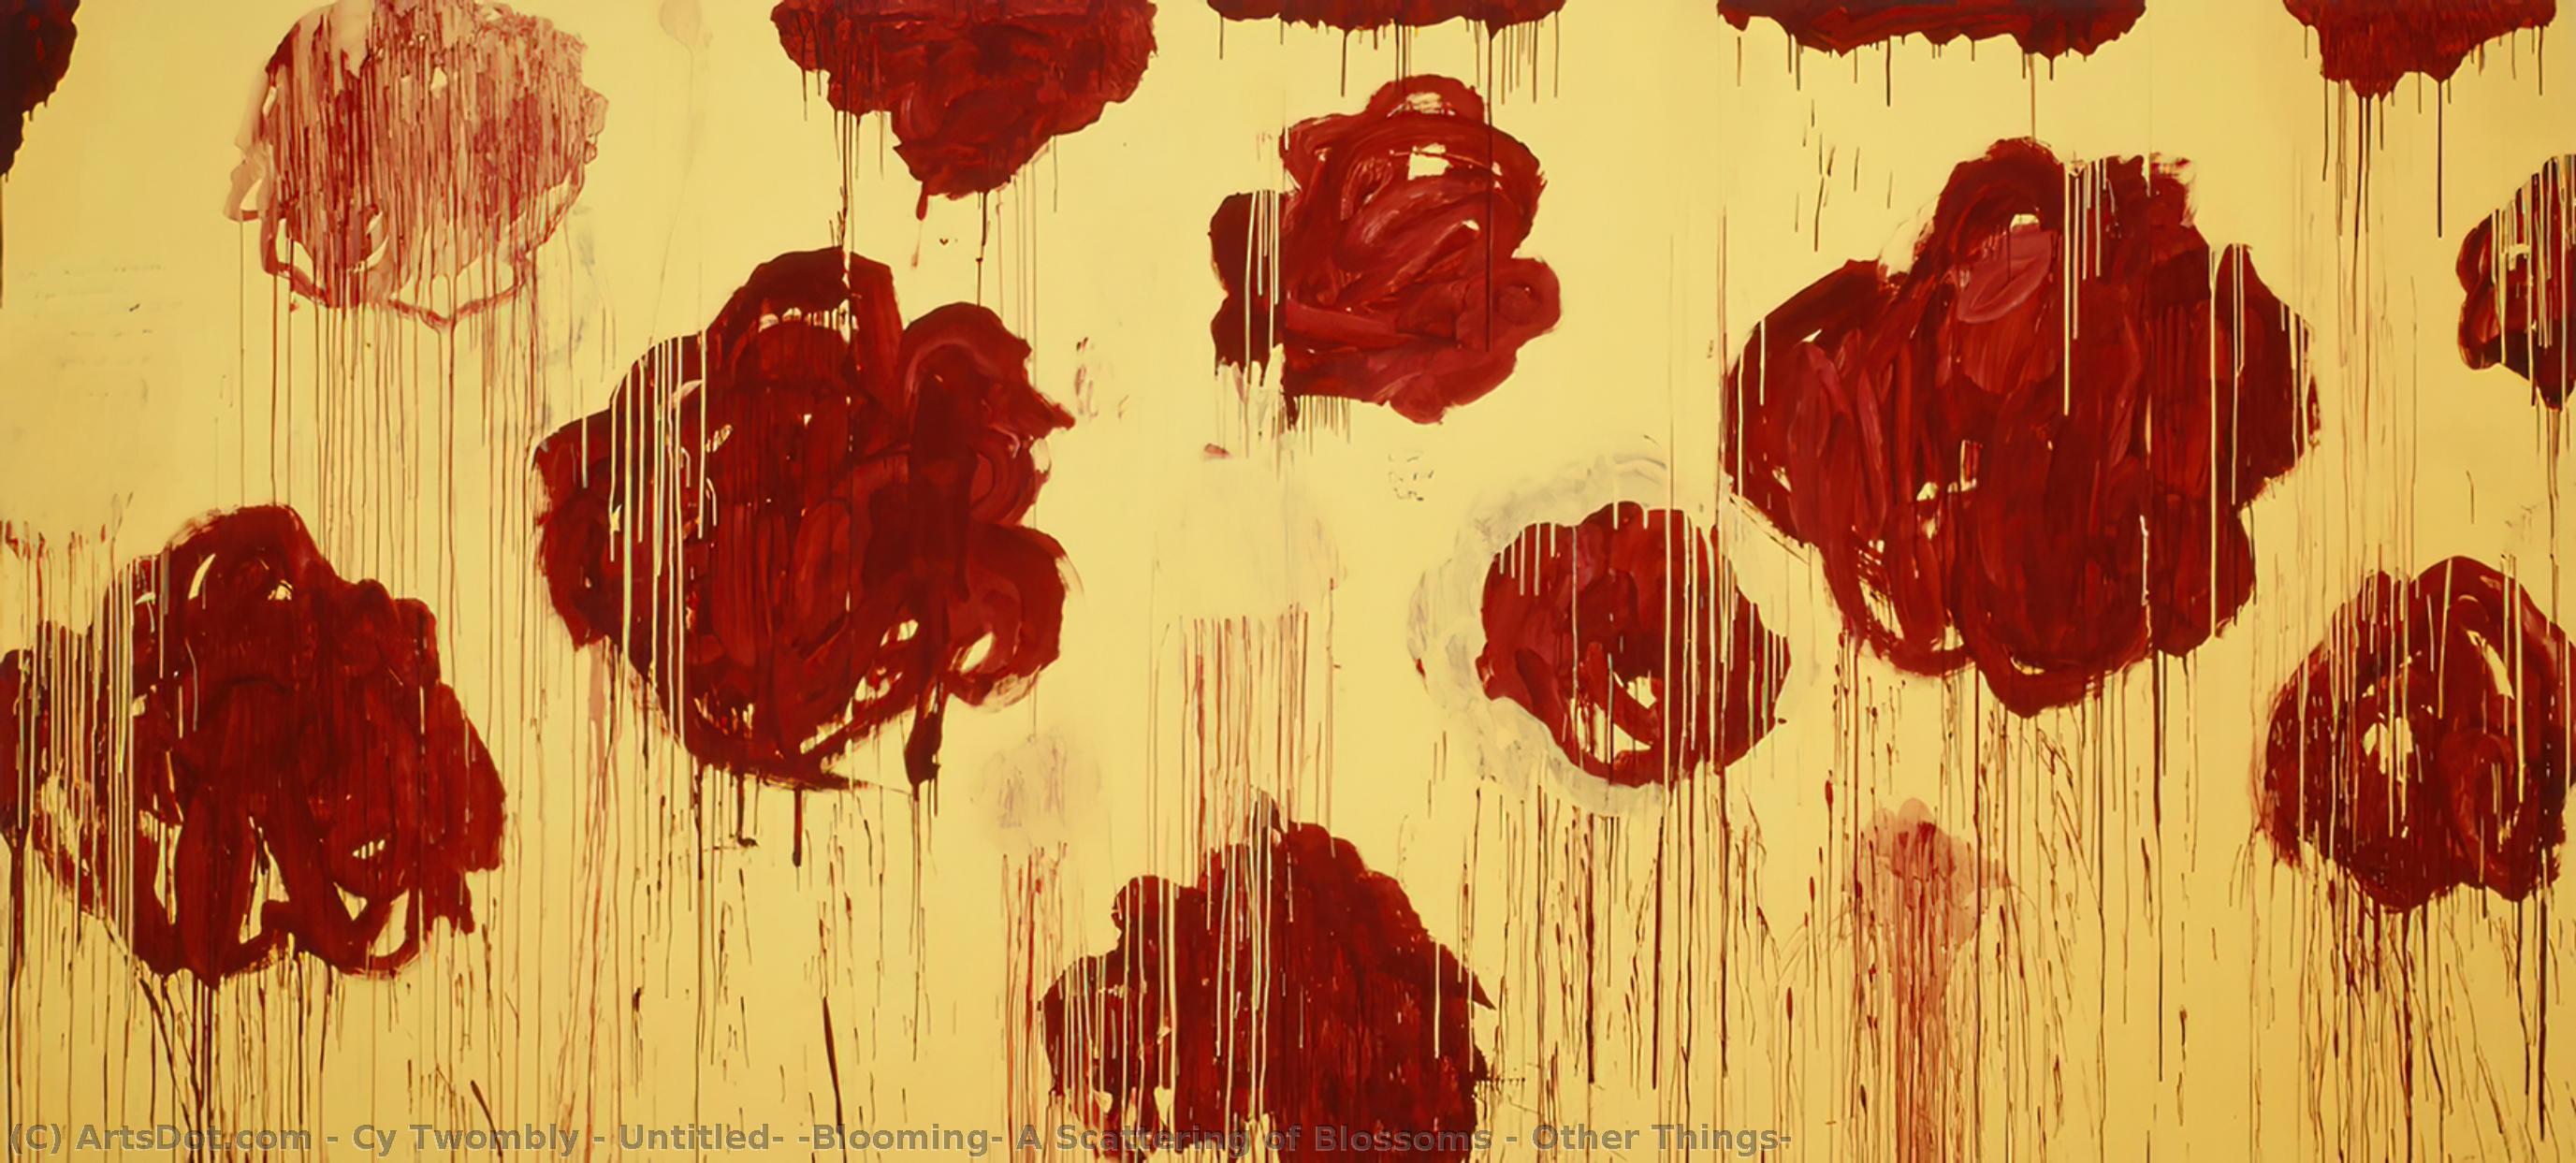 WikiOO.org - Encyclopedia of Fine Arts - Maalaus, taideteos Cy Twombly - Untitled, (Blooming, A Scattering of Blossoms ^ Other Things)